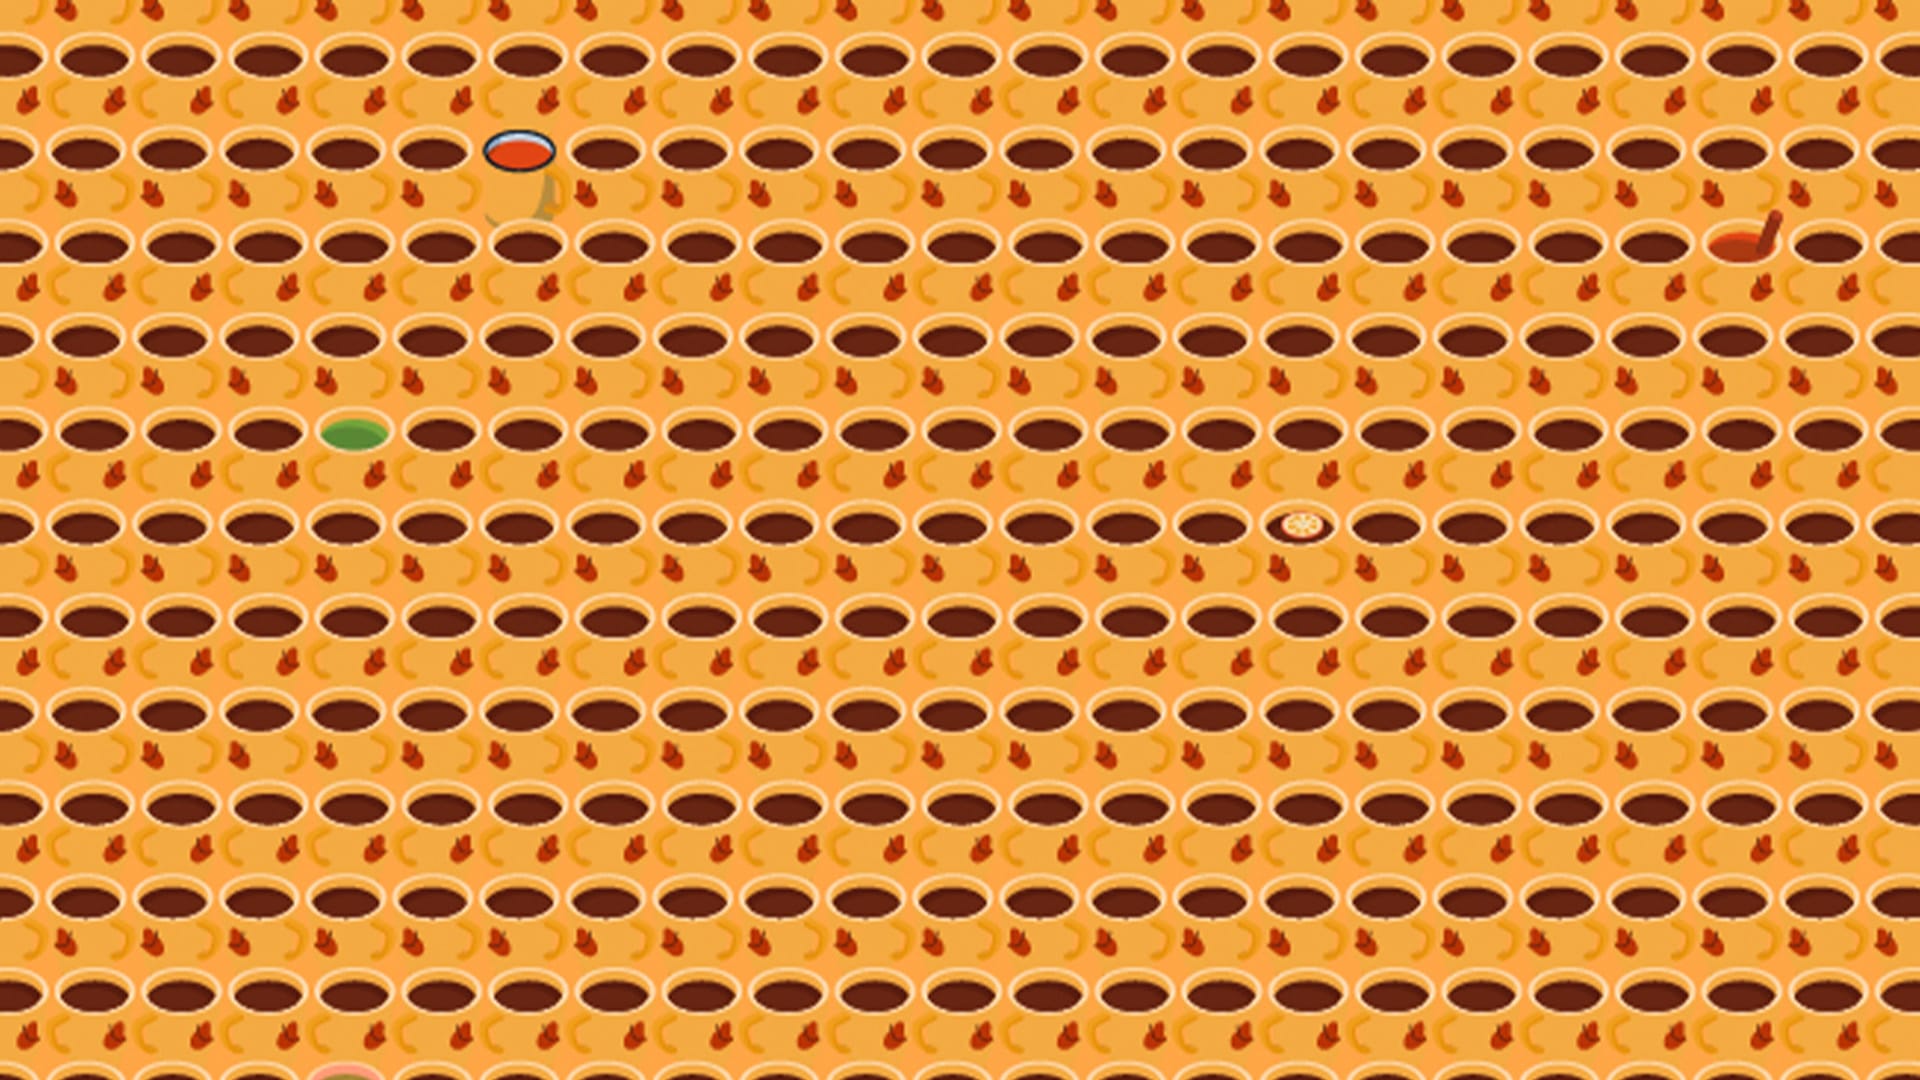 You have 20/20 vision if you can see 6 odd drinks among pumpkin spice lattes in optical illusion in less than 10 seconds